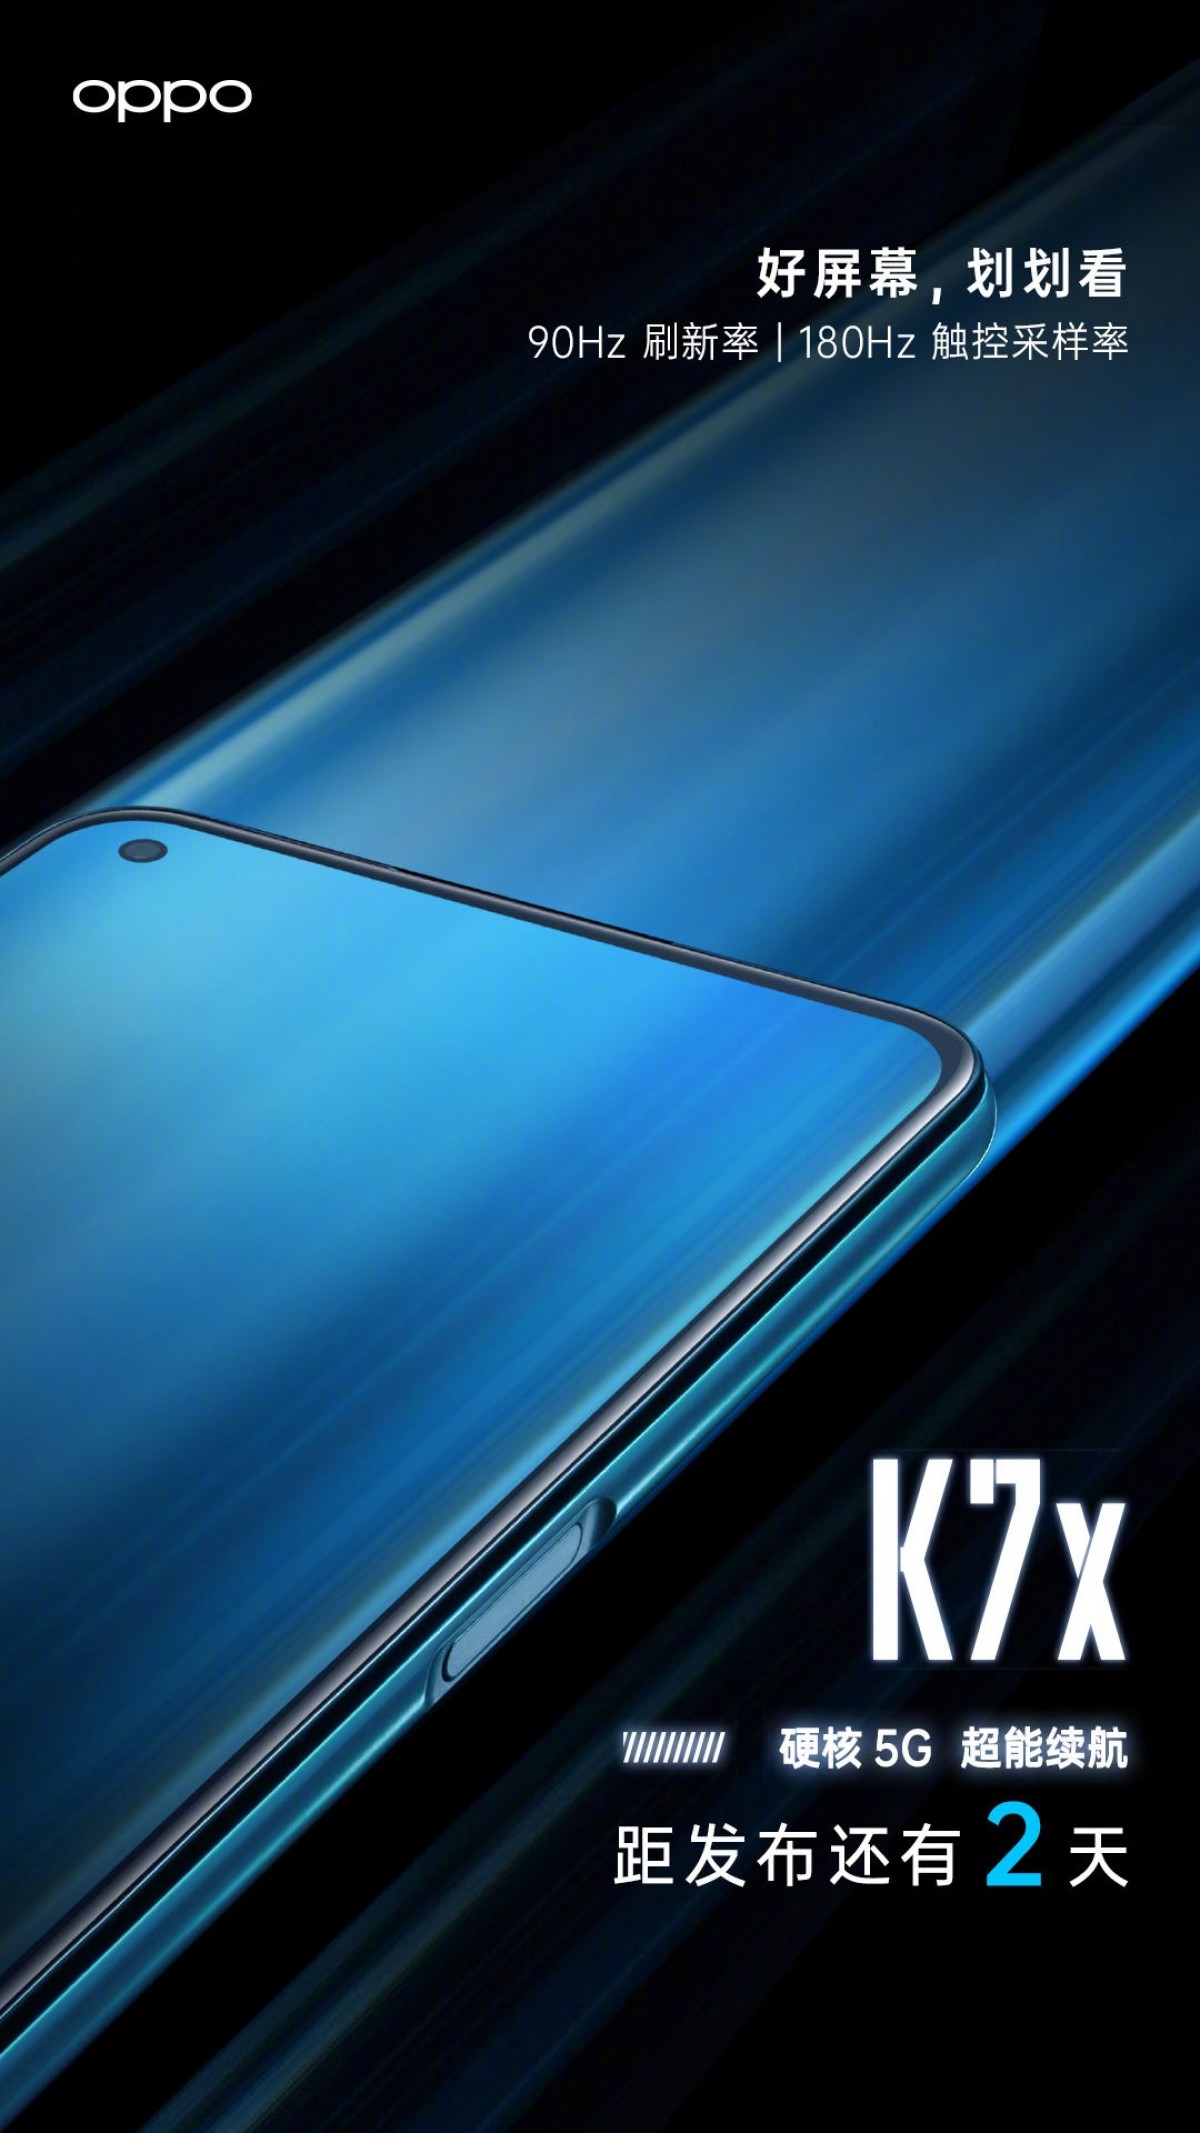 More Oppo K7x specs appear ahead of launch